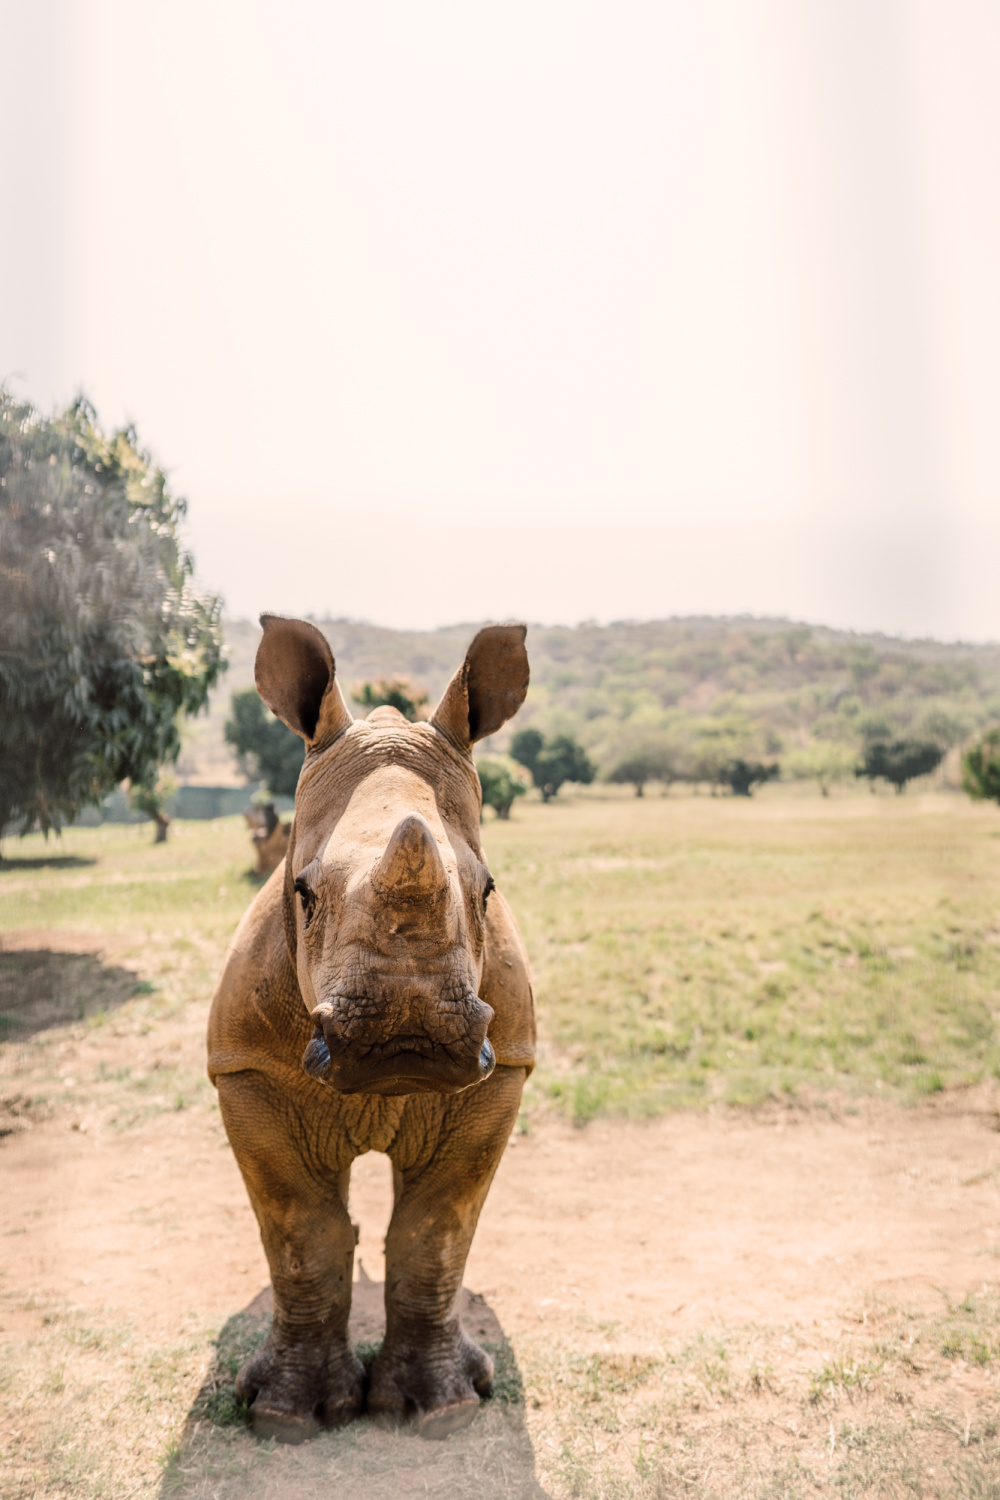 The Fight to Save a Species – one rhino orphan's remarkable